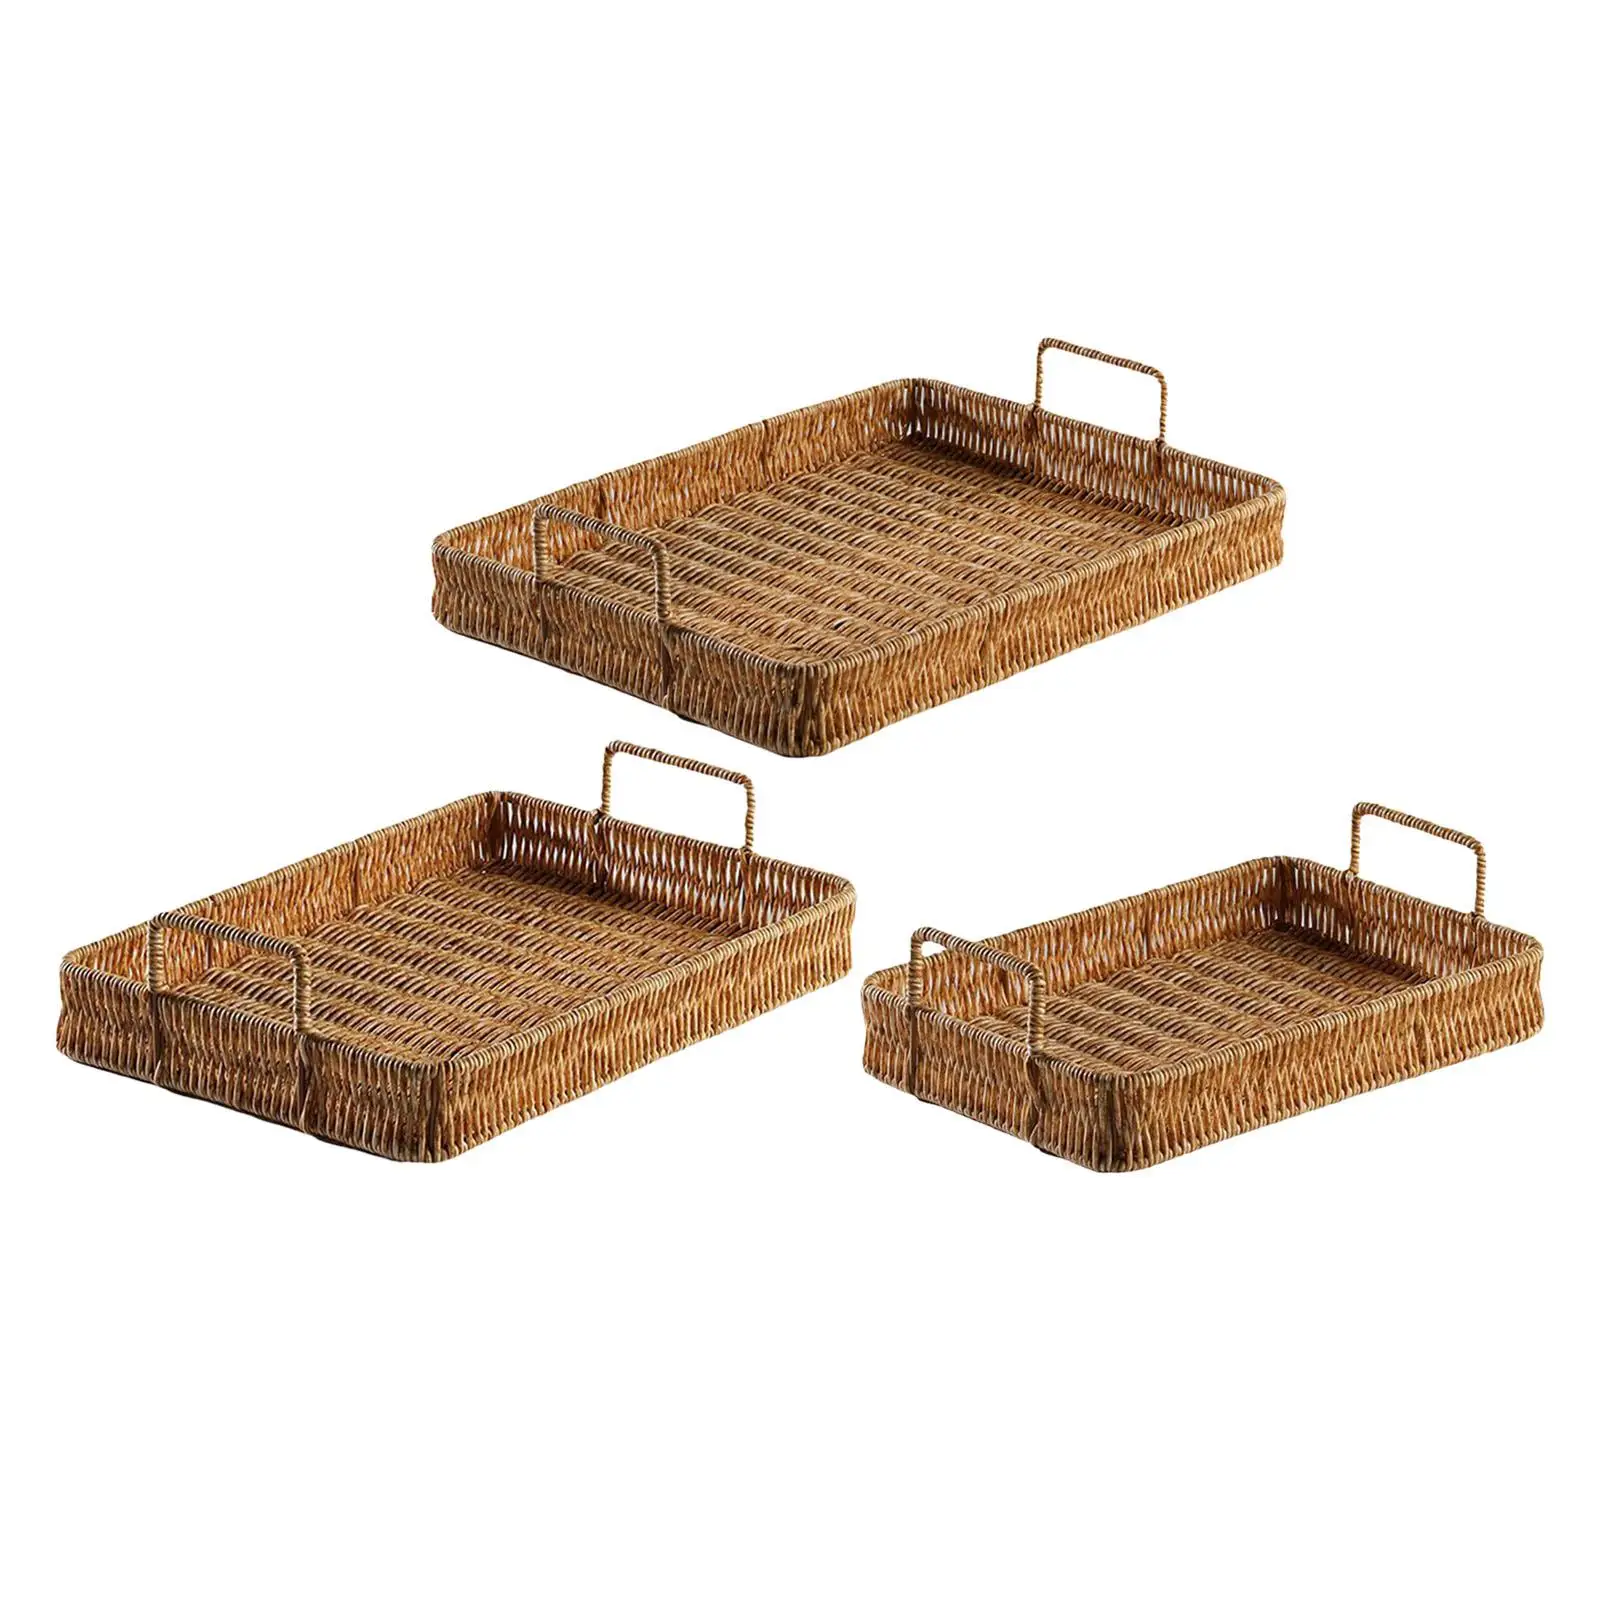 Rectangle Hand Woven Serving Tray Crafts with Handles Vegetables Holder Breakfast Serving Trays Multi Use for Wedding Gift Home